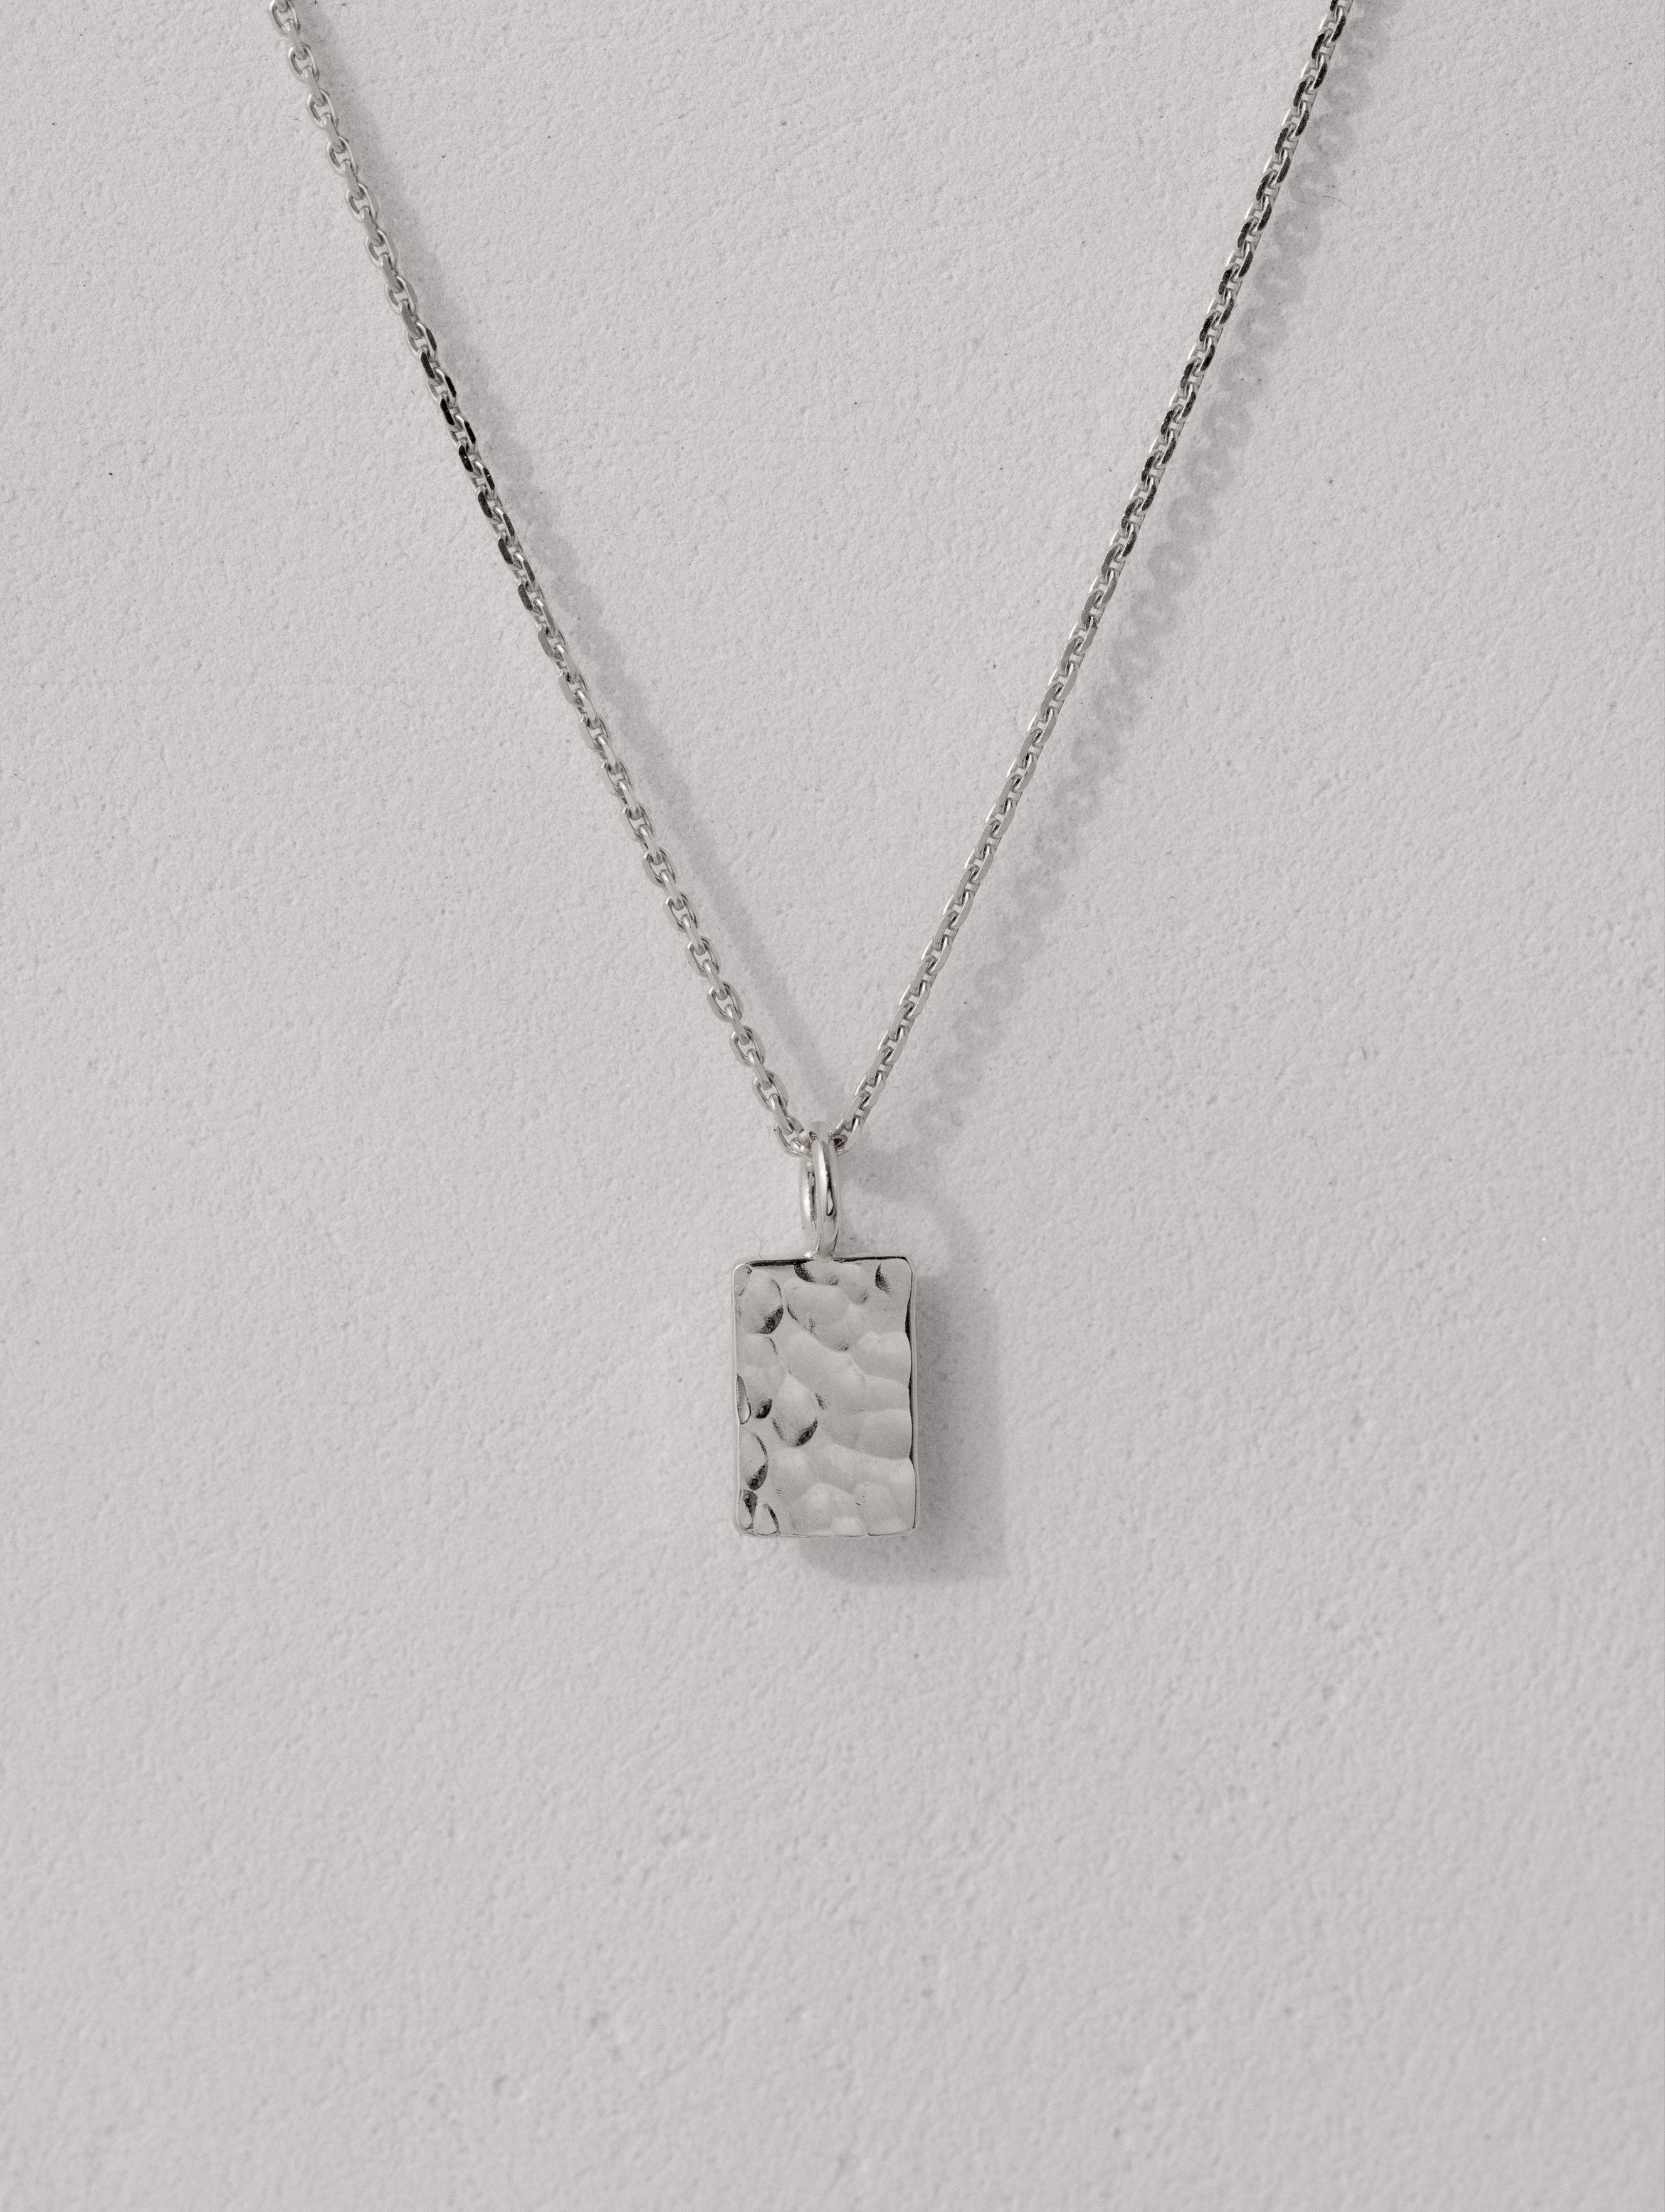 Shape Necklace - Small Tag